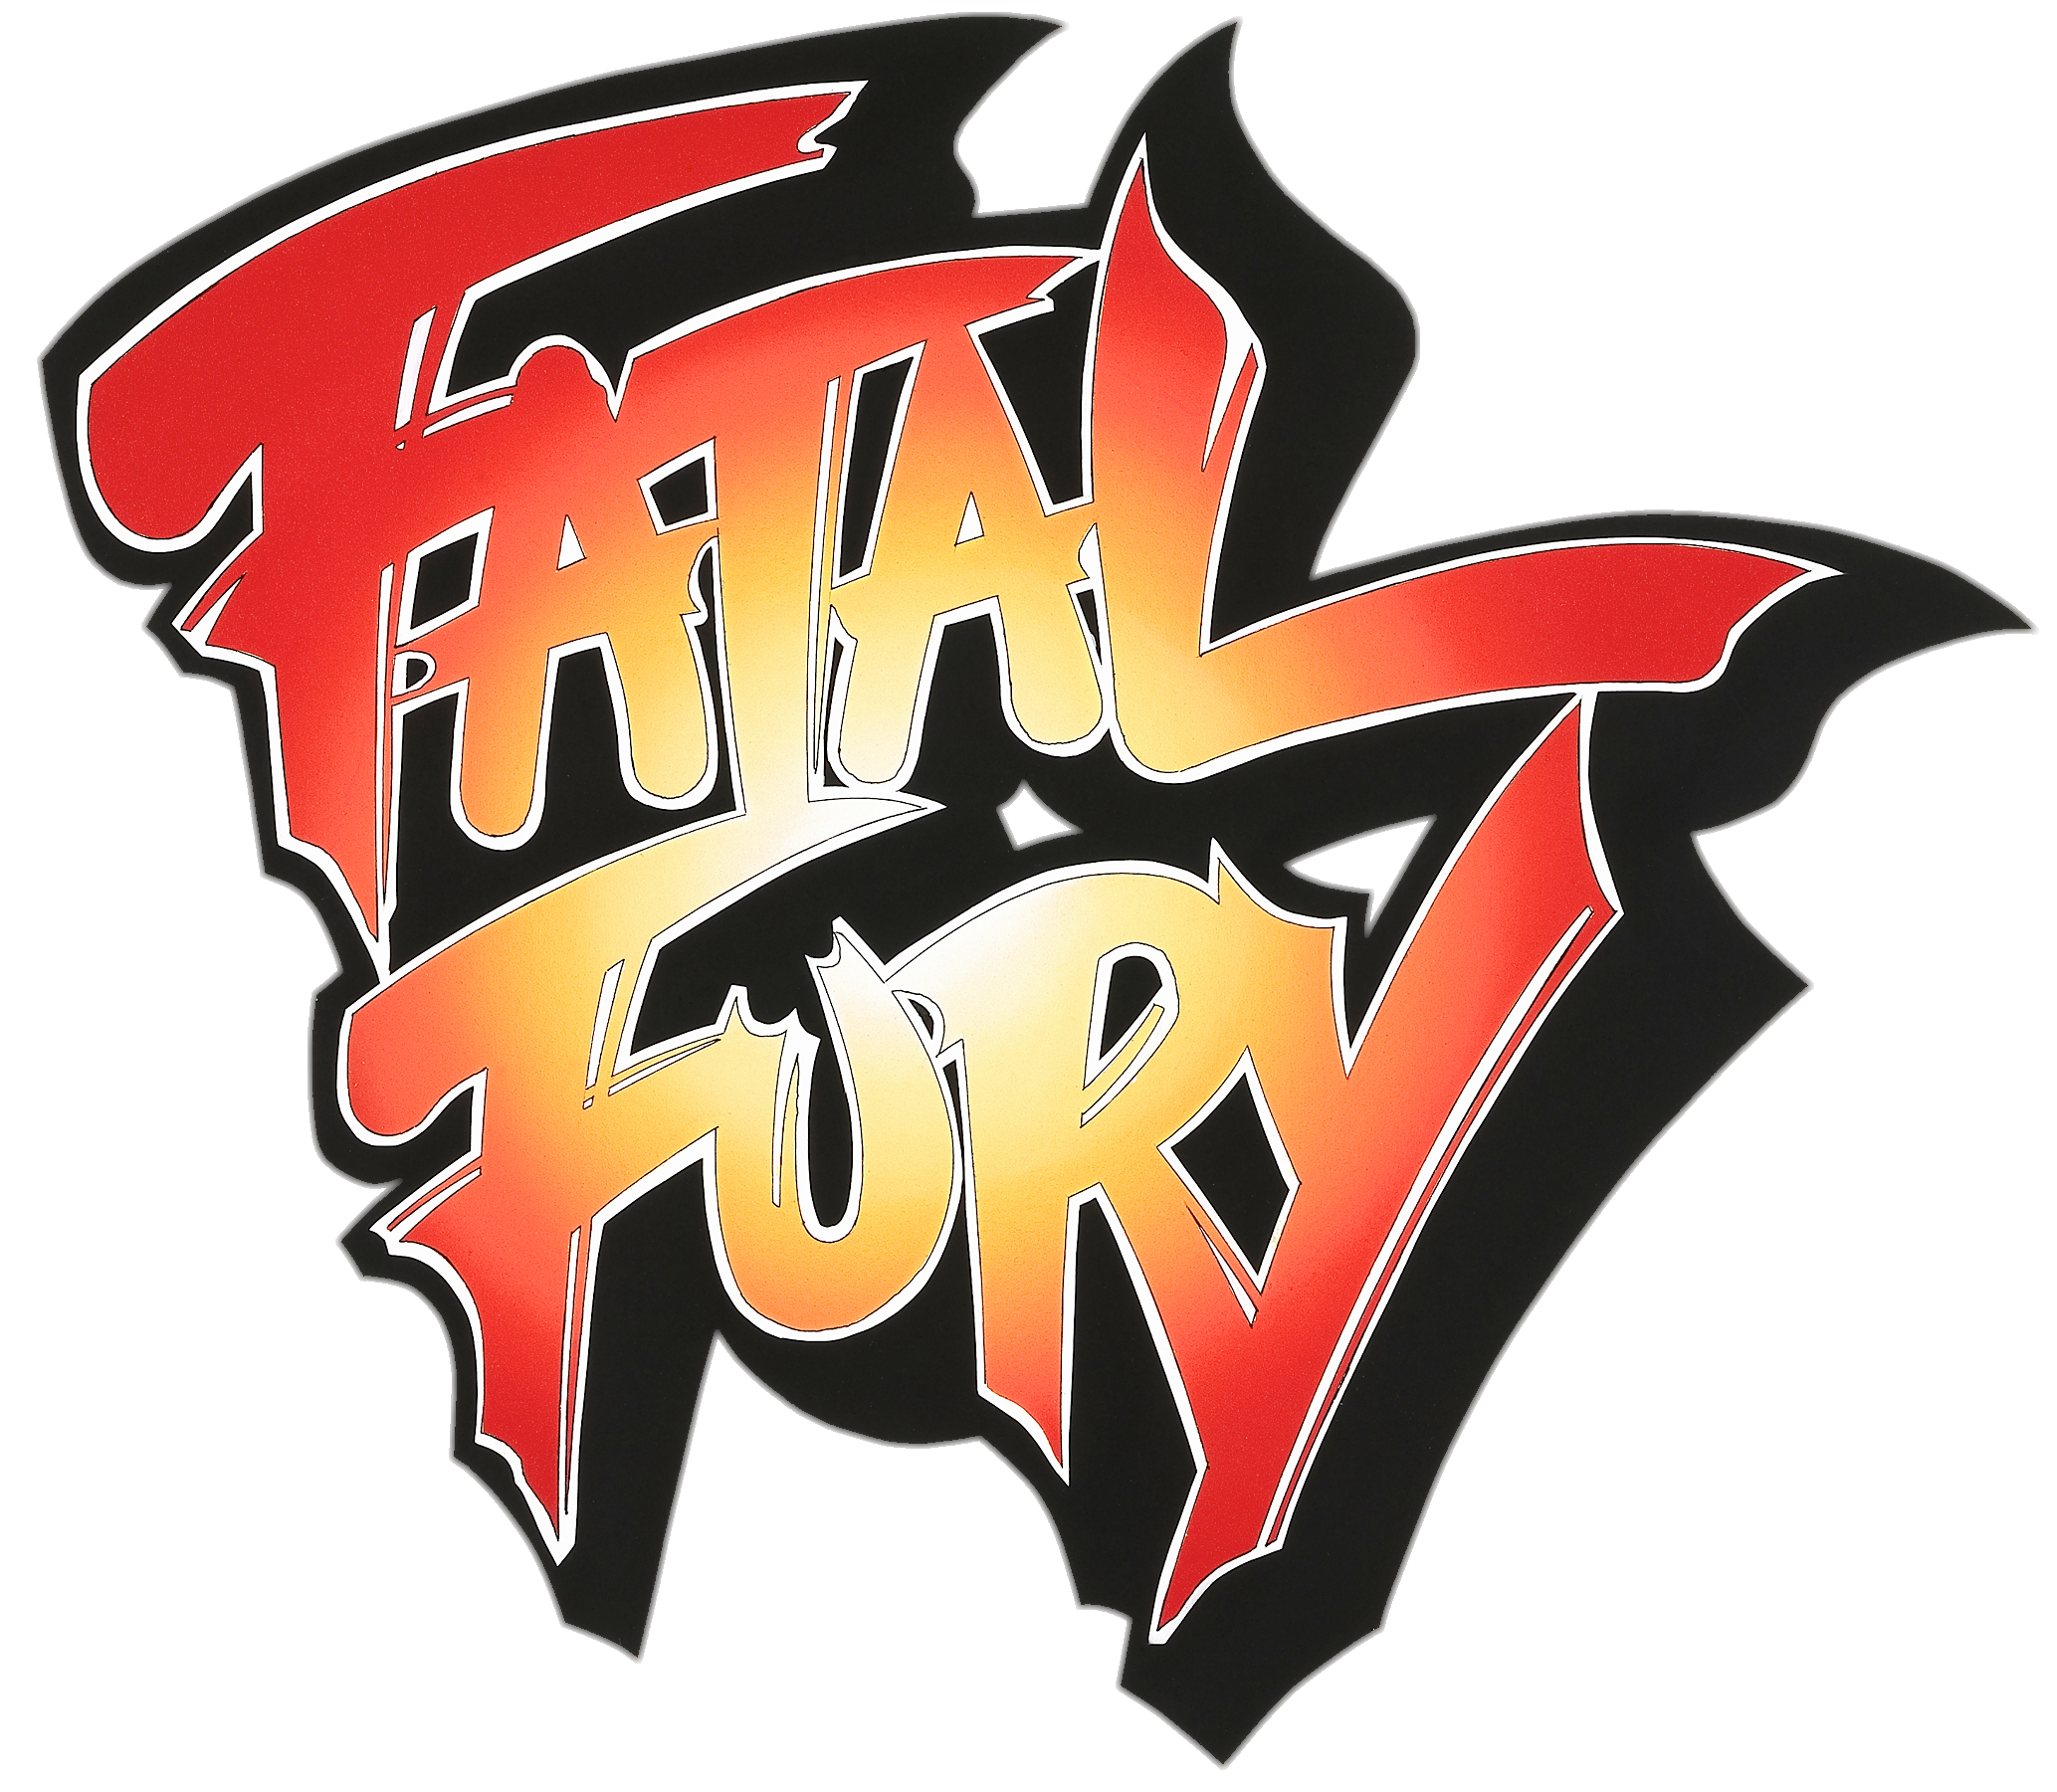 Fatal Fury (NEO GEO Collection) Review - Just Push Start